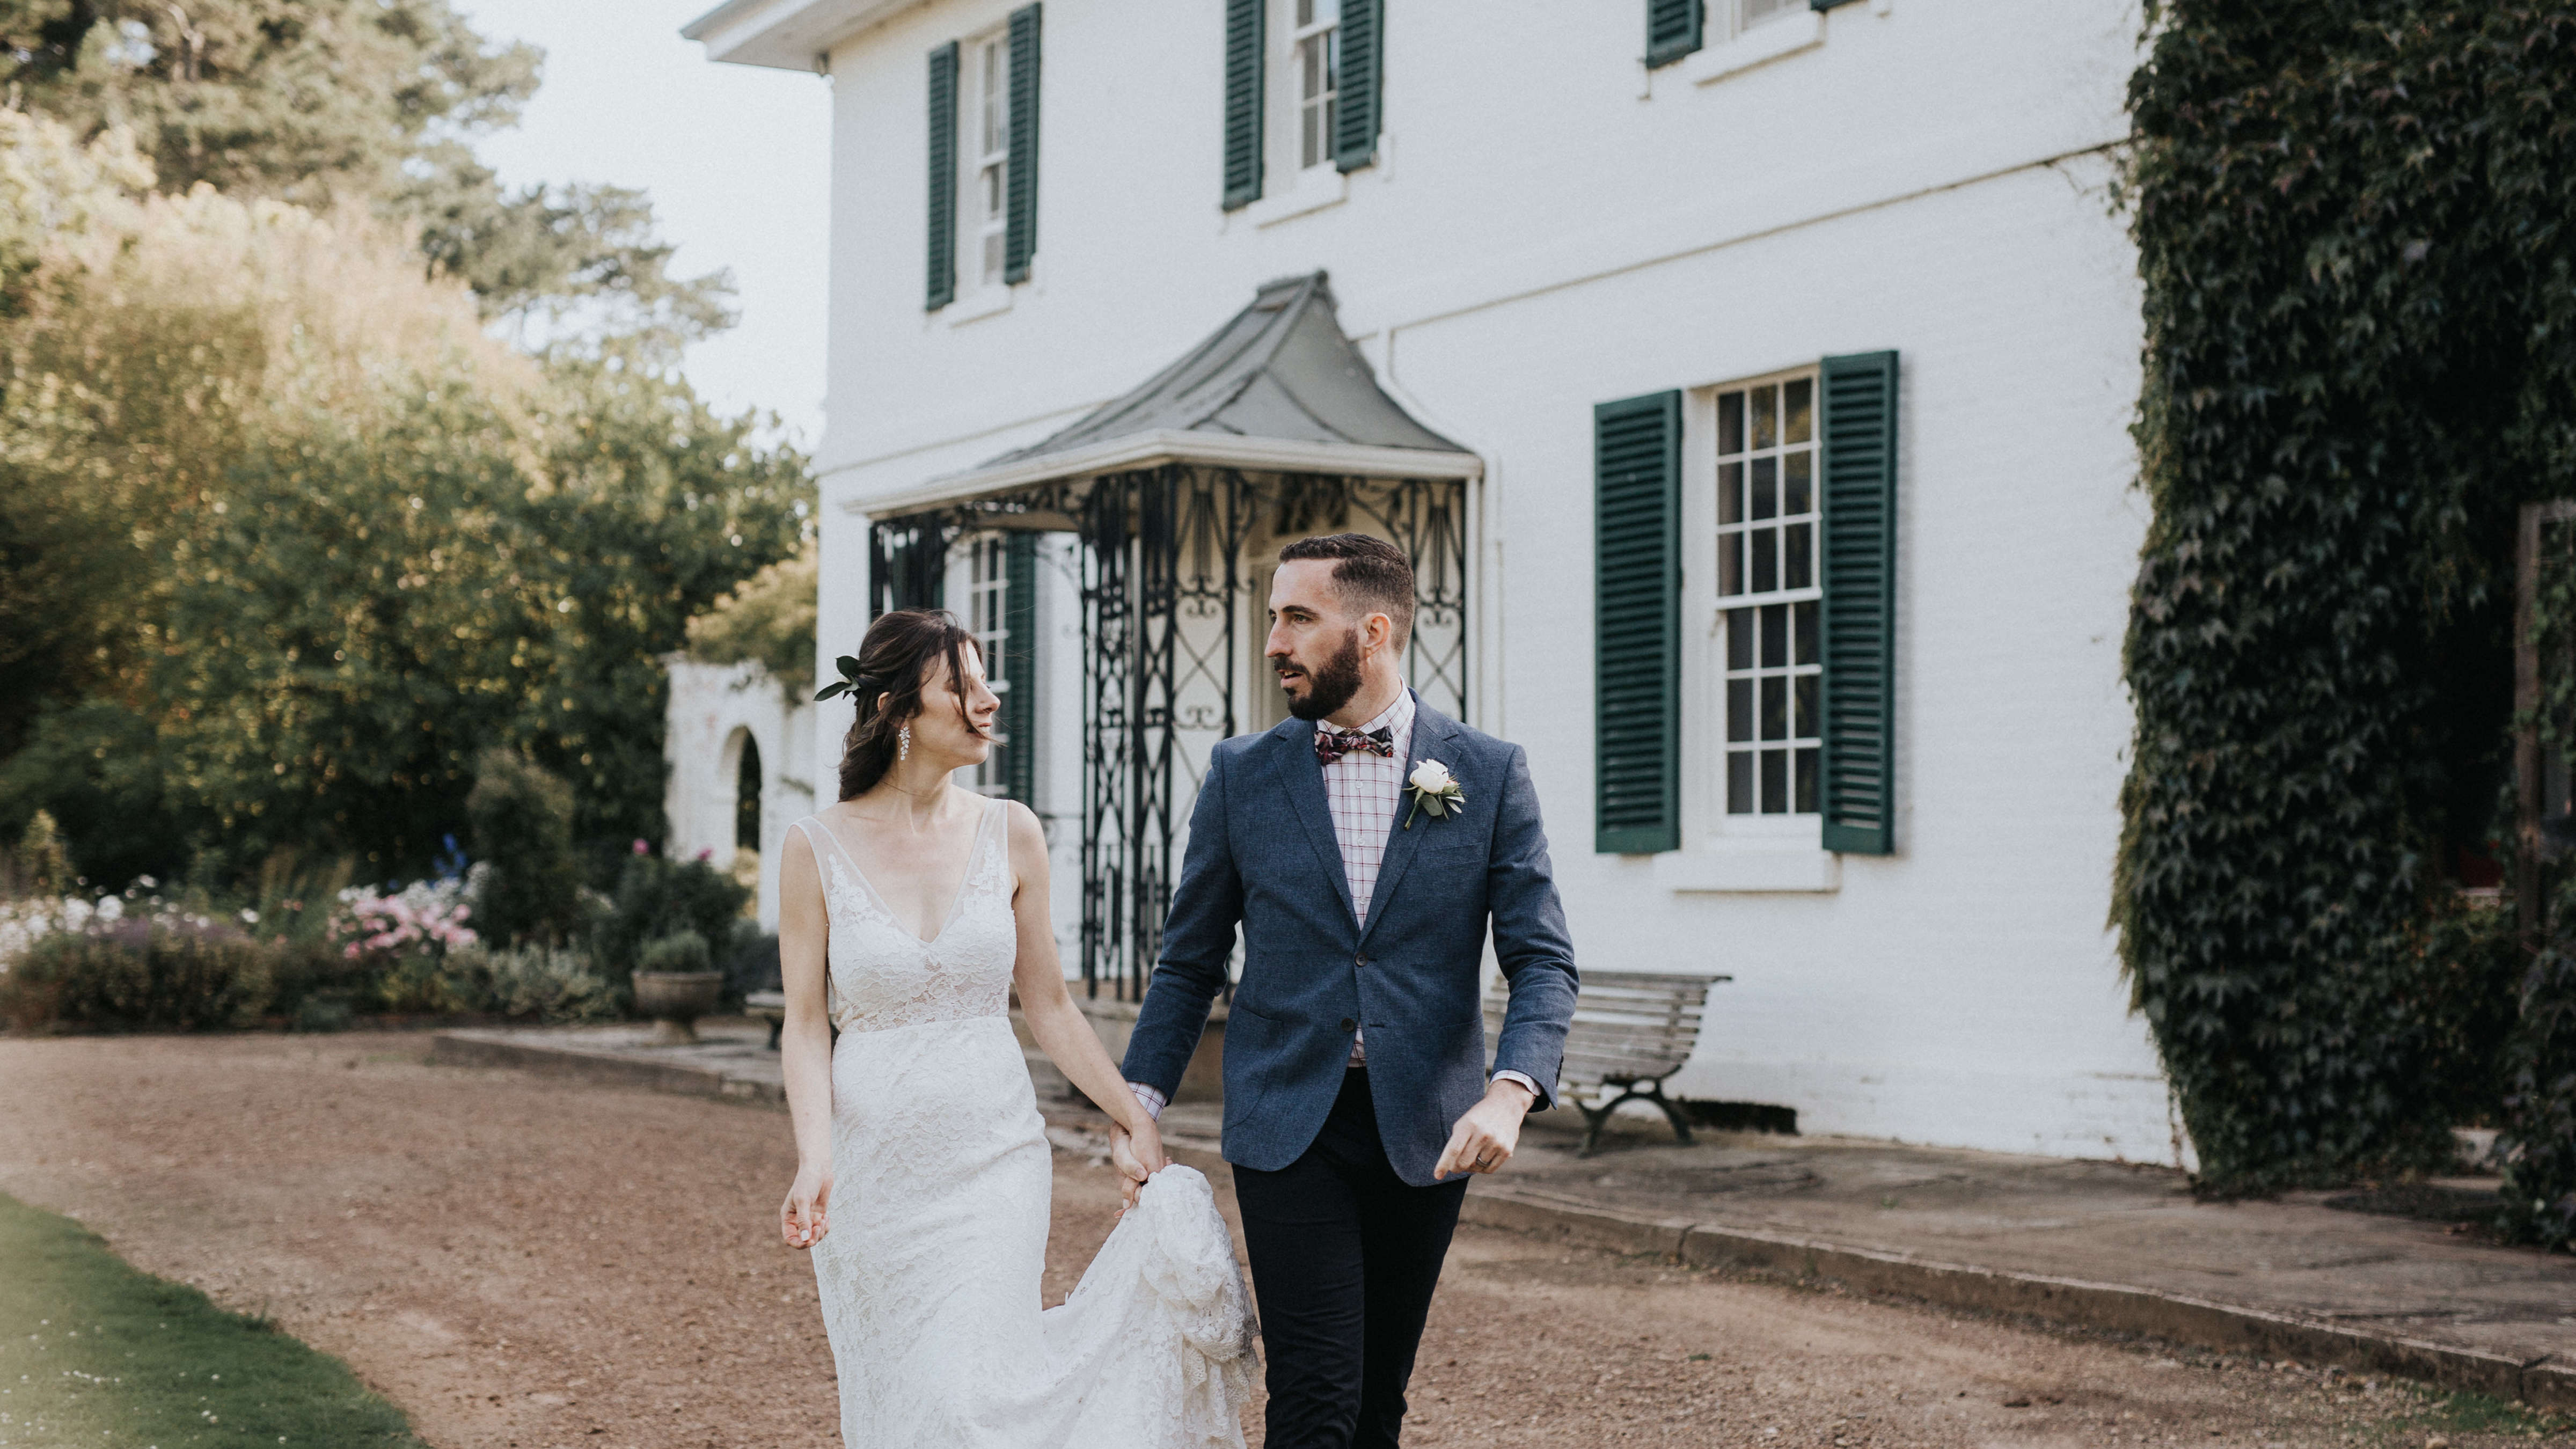 A bride and groom walk along the carriage way in front of the Brickendon Homestead. Boston Ivy covers part of the walls of the house and green shutters frame the Georgian paned windows. Photo: Cassie Sullivan.